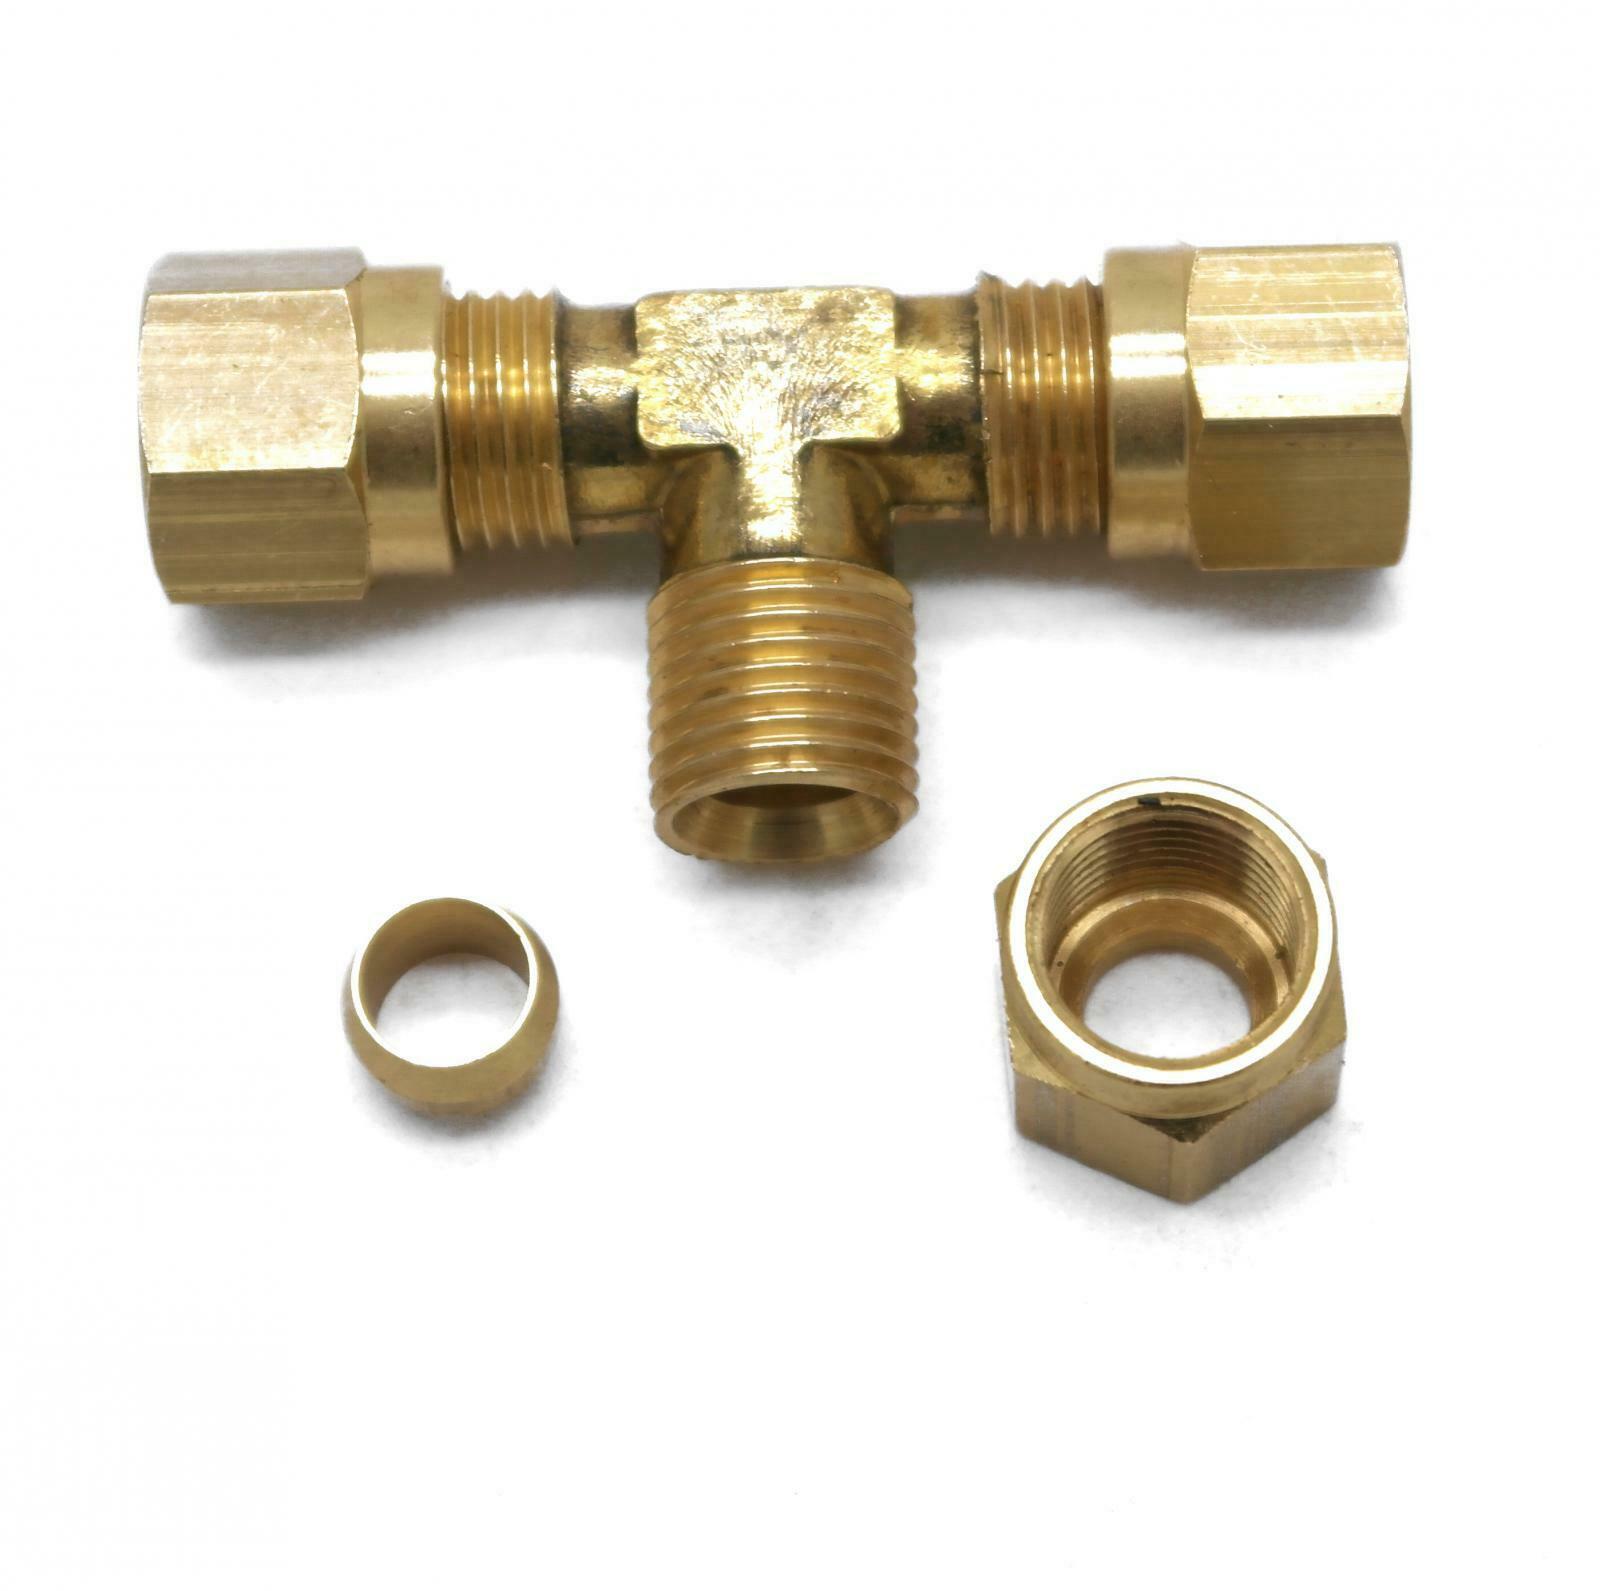 British Made 6mm Equal Tee Brass Compression Fittings 